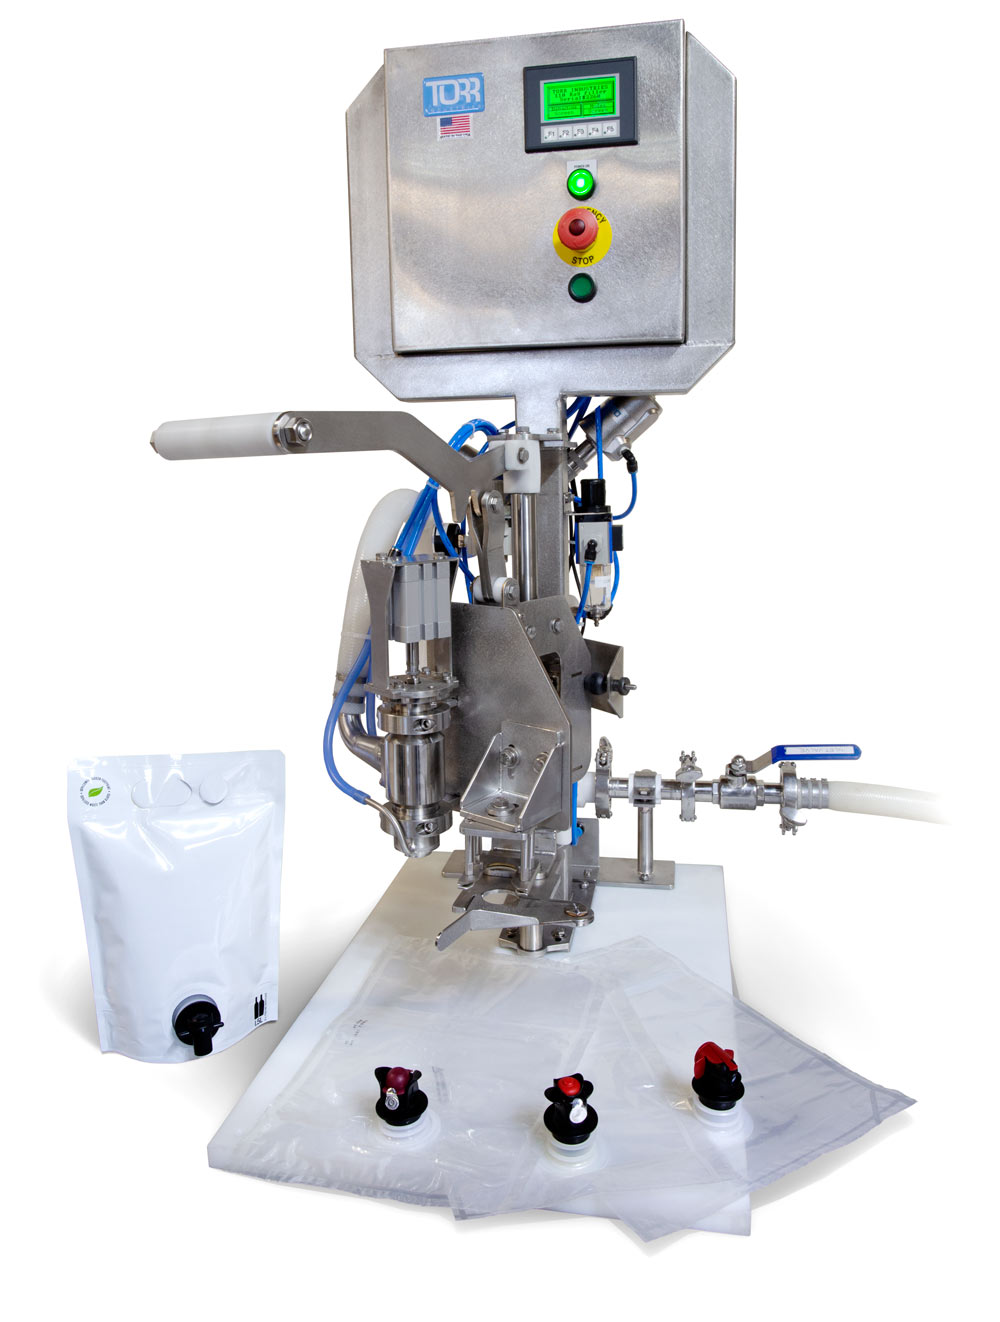 TORR 110 Semi Manual Product Filling Systems